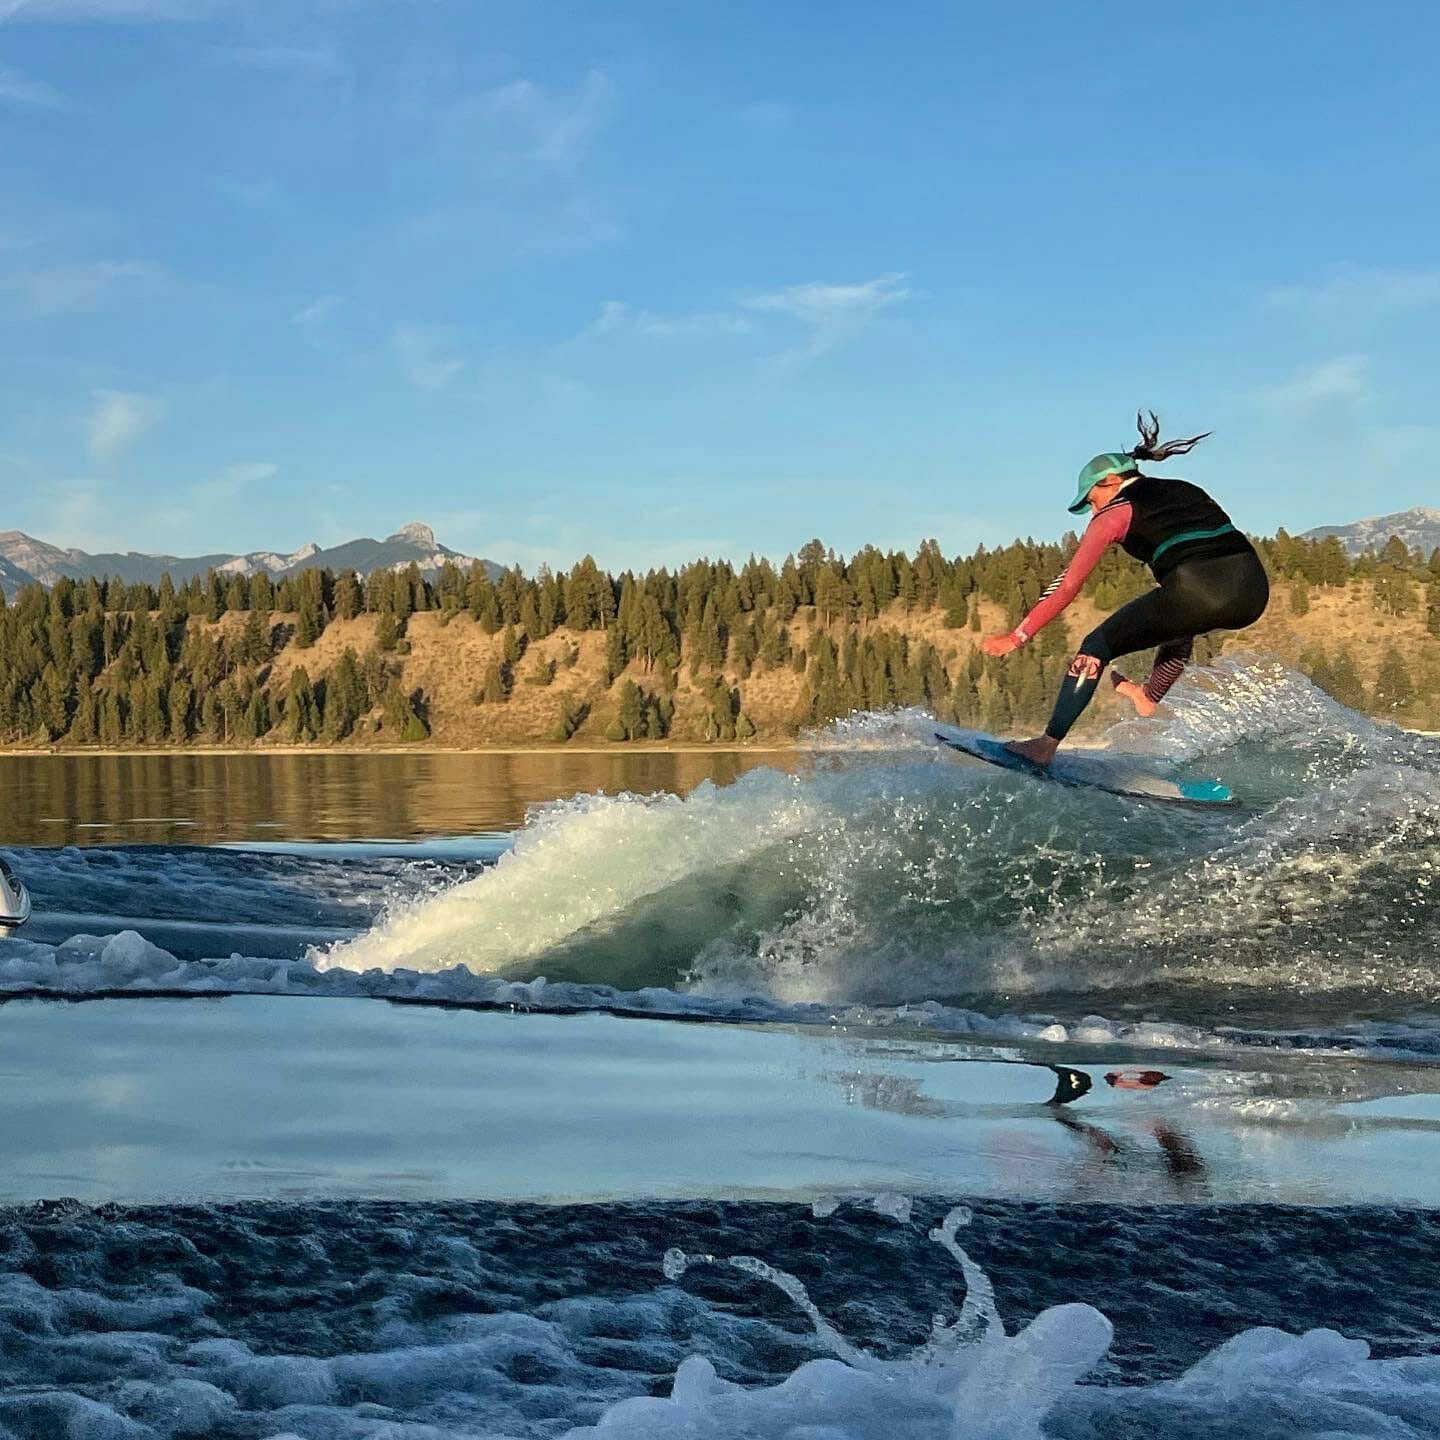 A person riding a surfboard on a lake with a Supreme Boat.